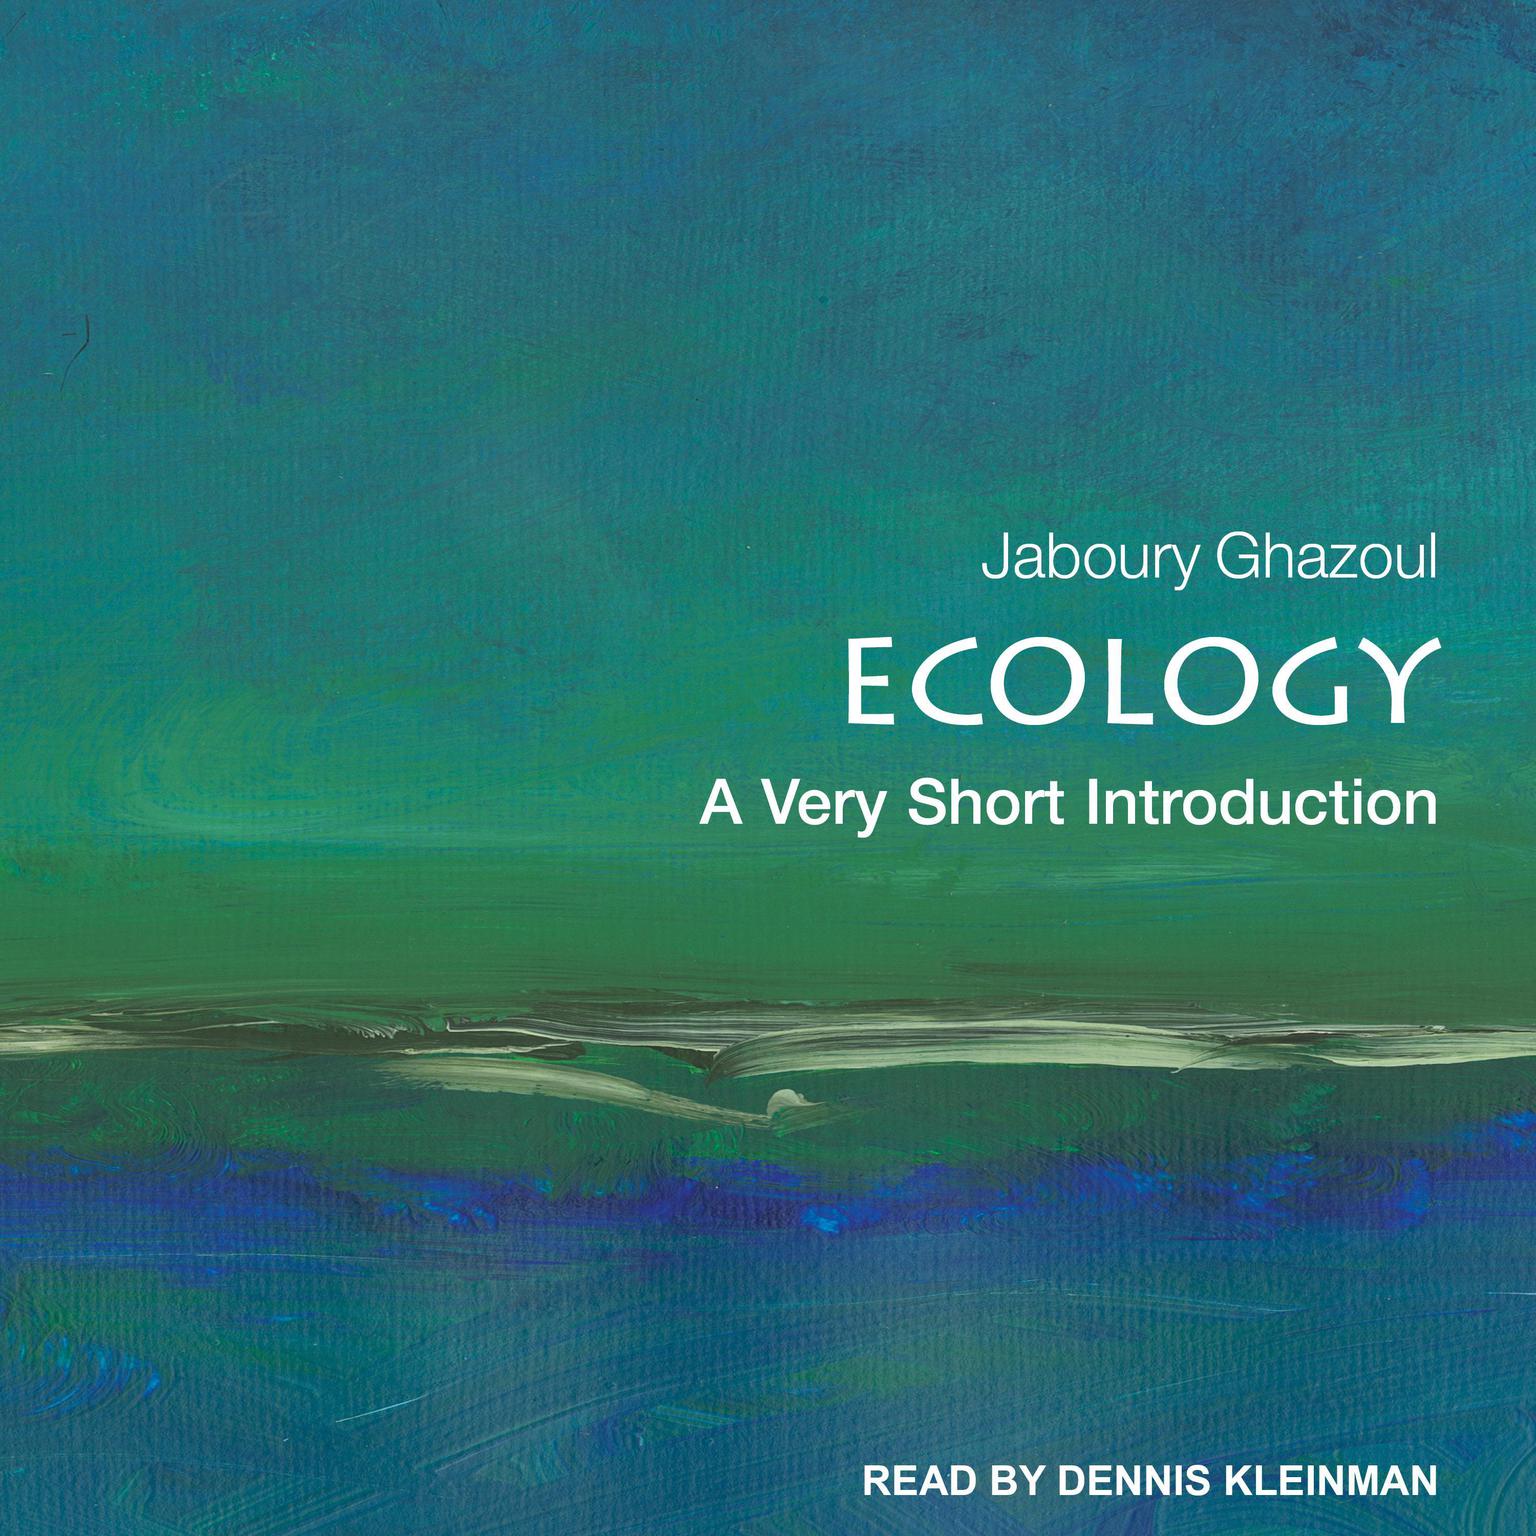 Ecology: A Very Short Introduction Audiobook, by Jaboury Ghazoul